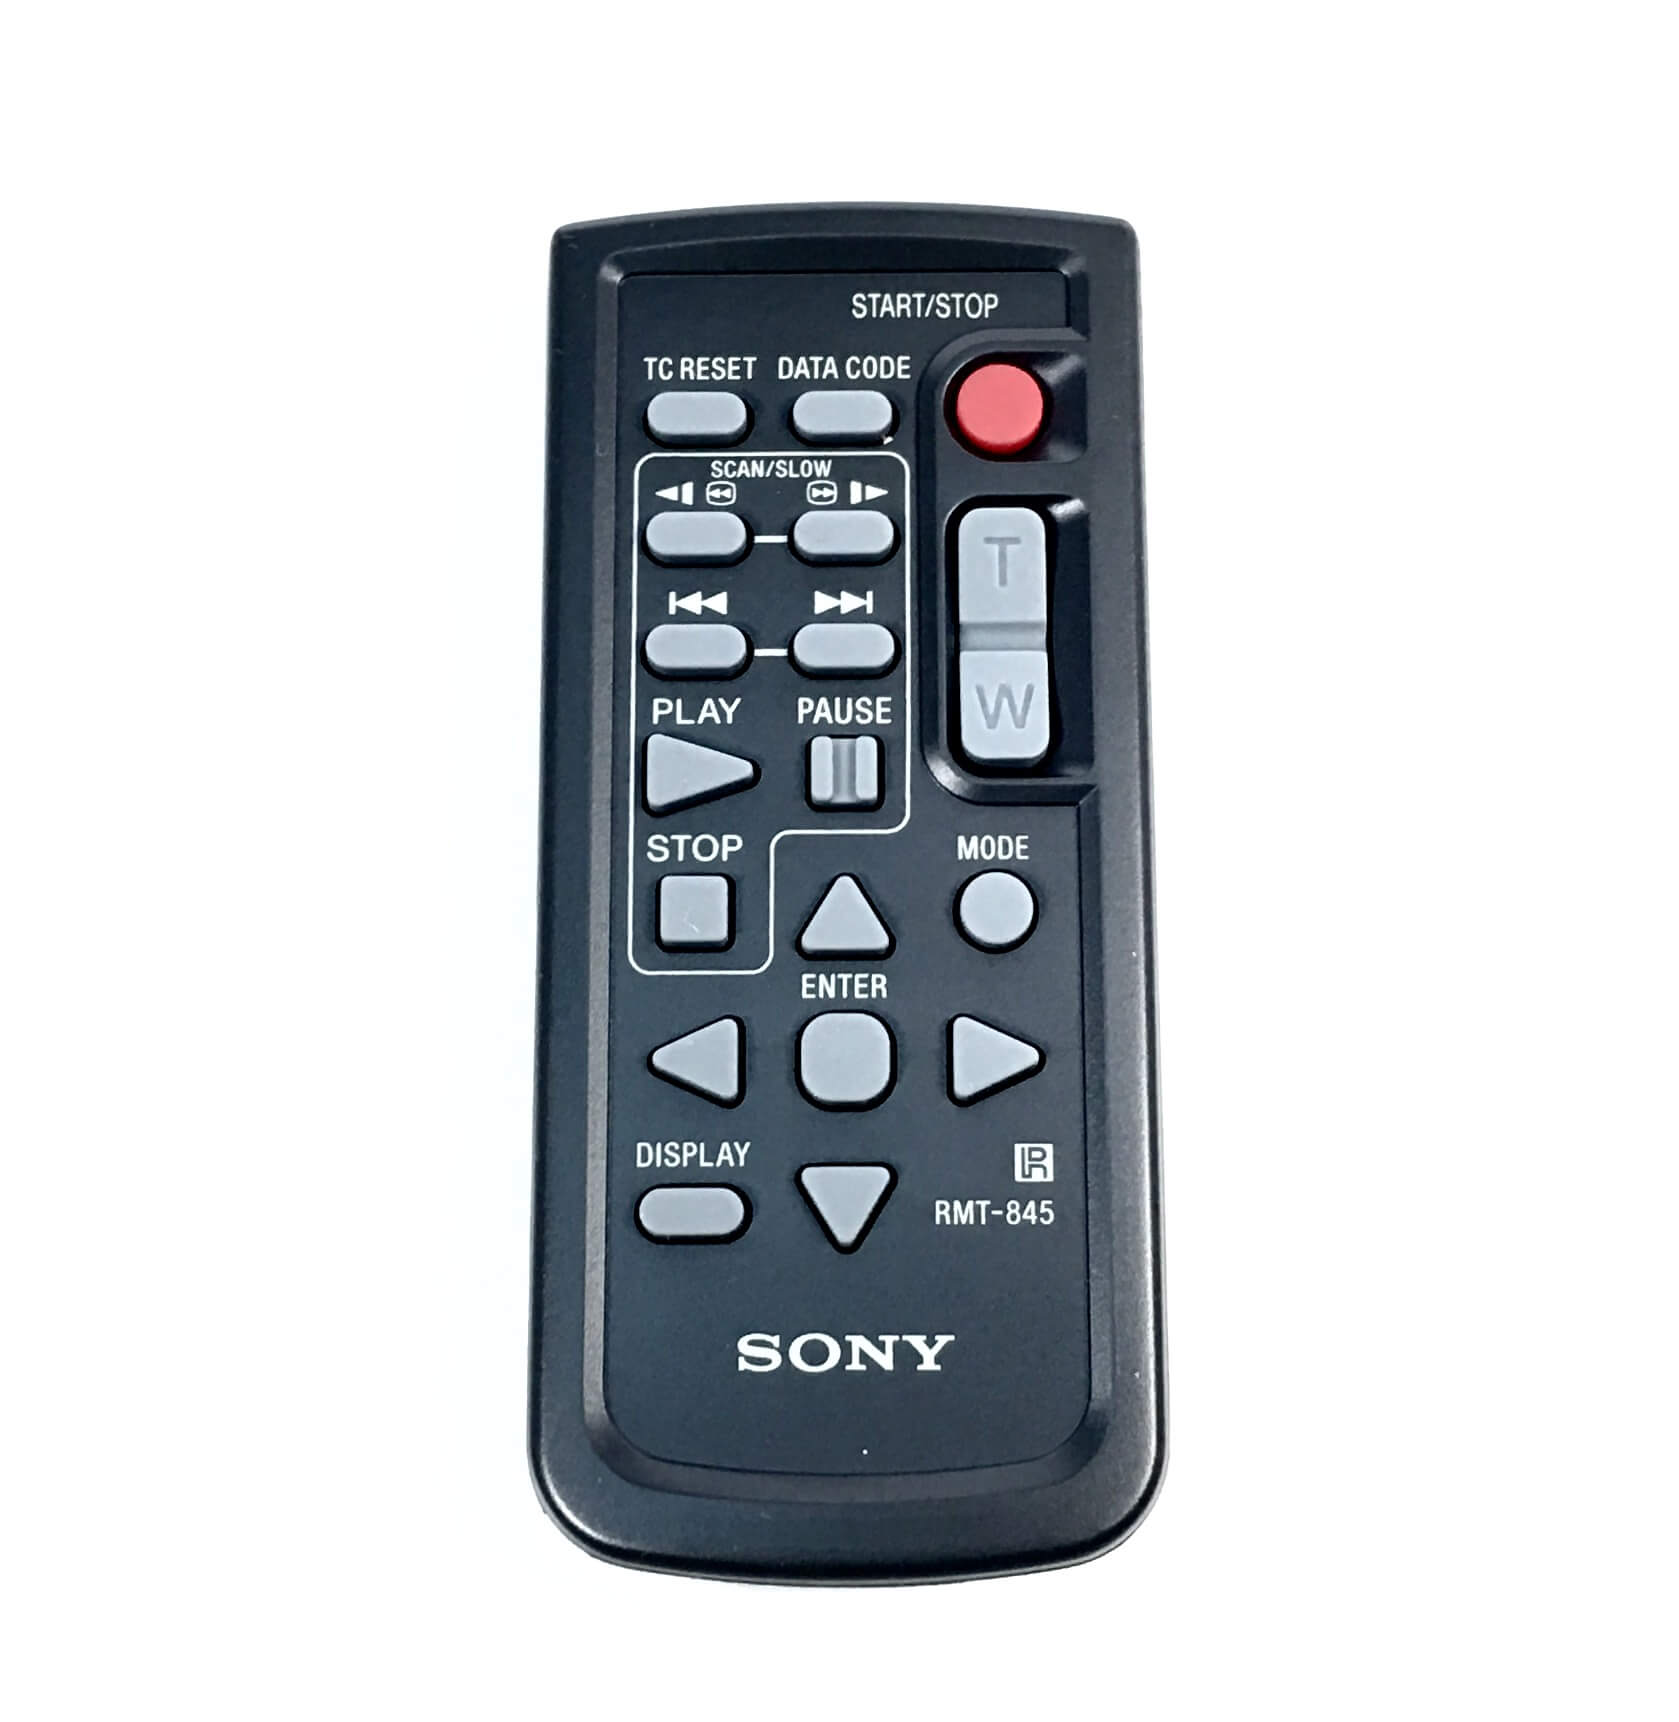 Original wireless remote control that came with the Sony HXR-NX70u camcorder. It is a genuine Sony part, sourced directly from Sony USA. Brand new factory fresh. Free Shipping.